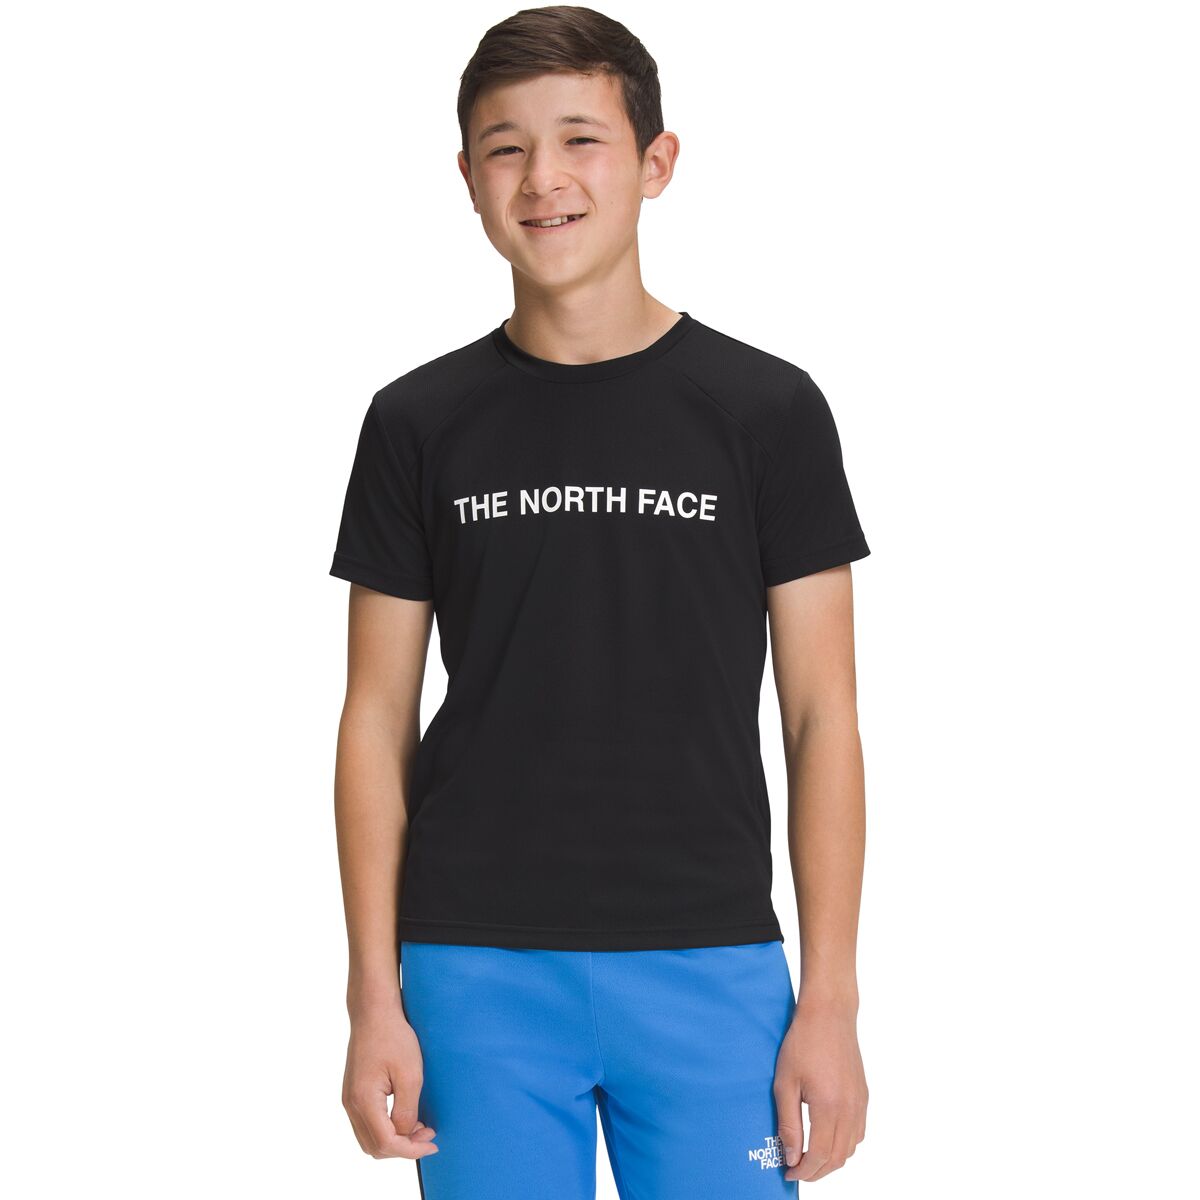 The North Face Never Stop T-Shirt - Boys'